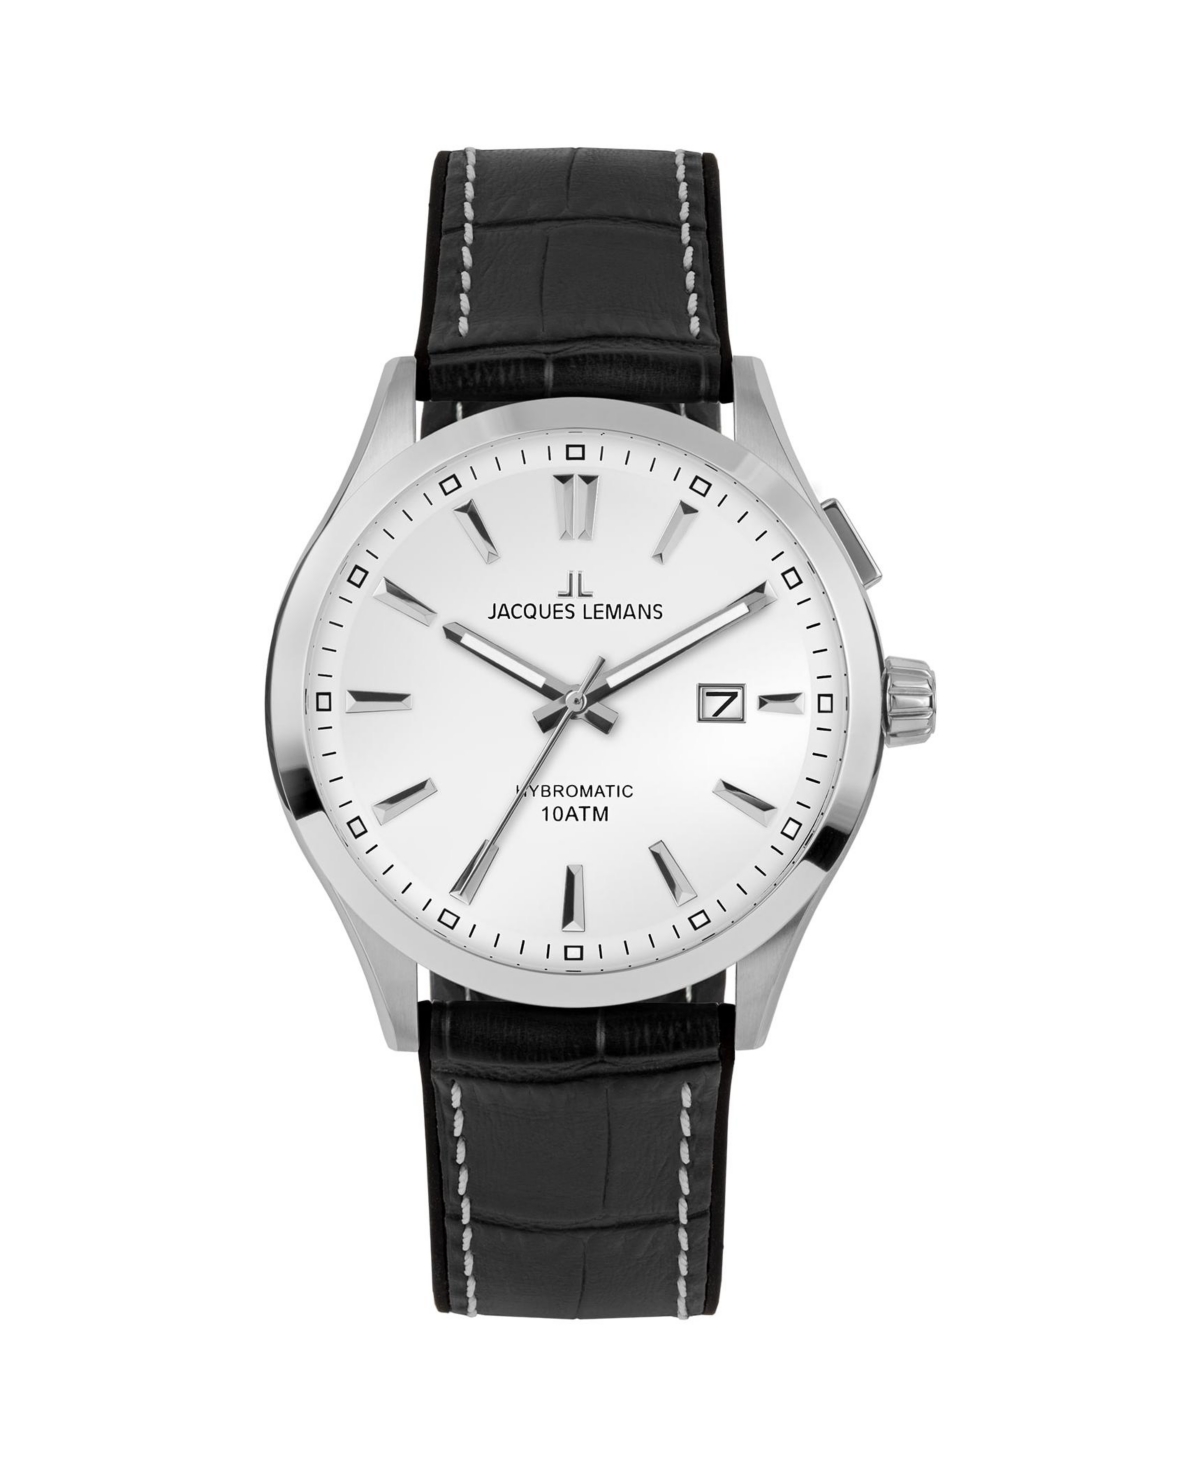 Men's Hybromatic Watch with Silicone/Leather Strap and Solid Stainless Steel 1-2130 - White